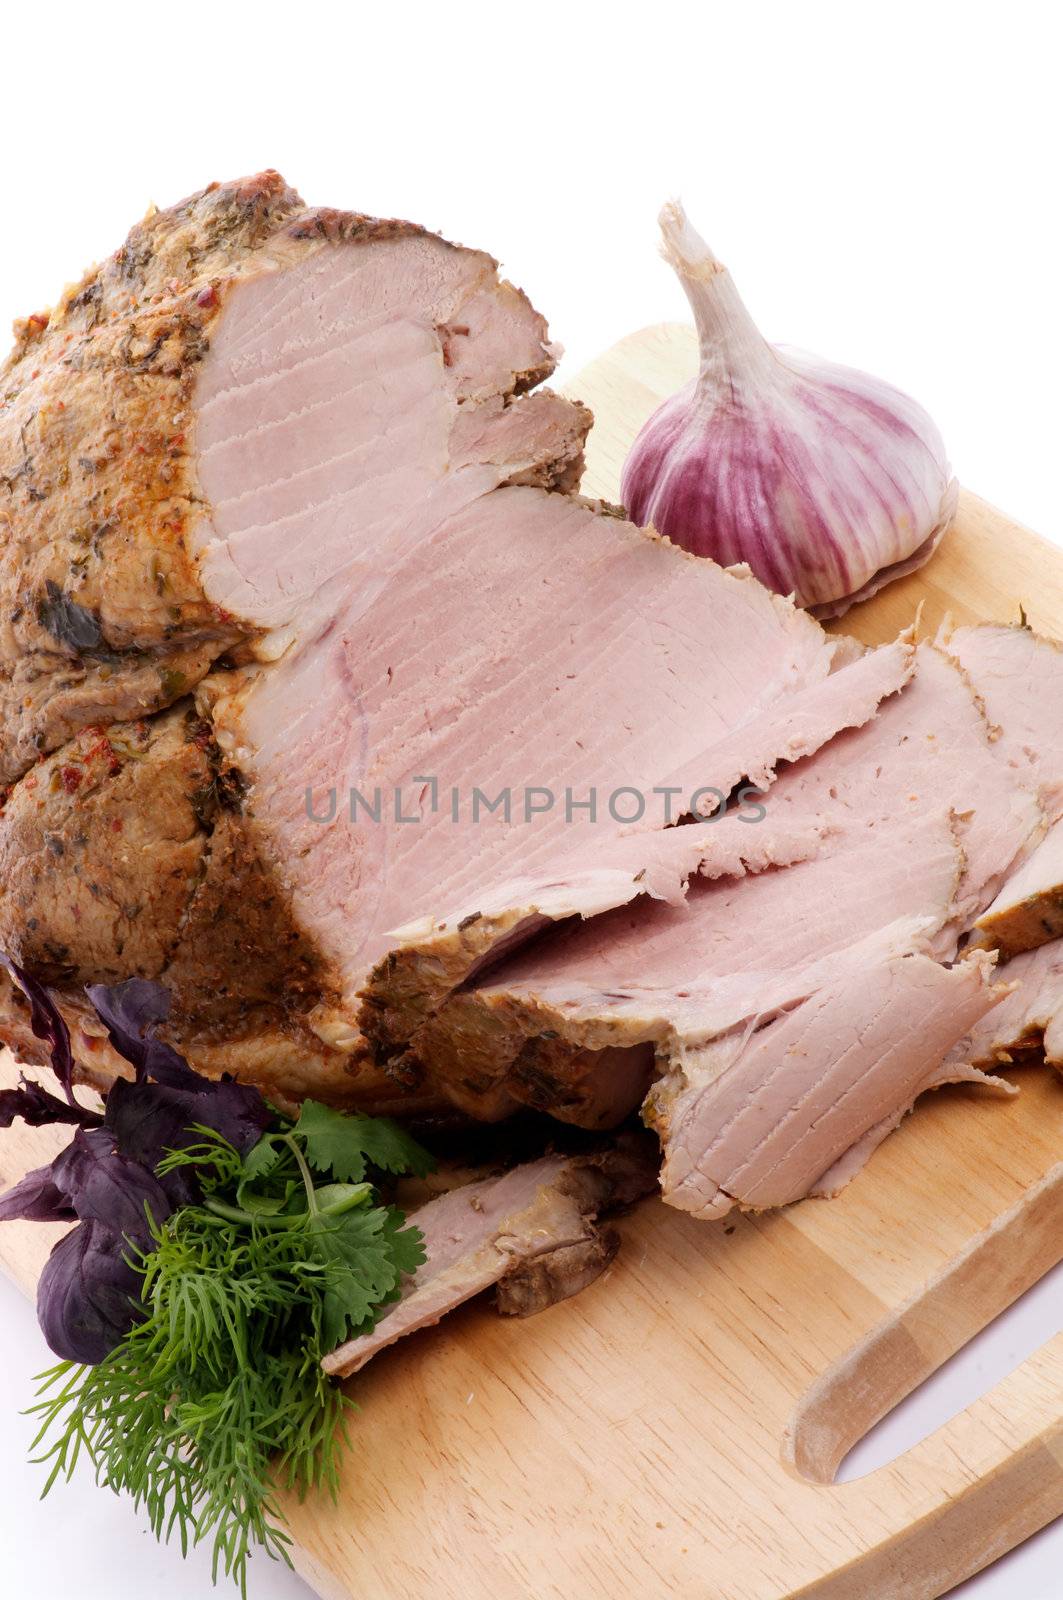 Pork Roast and Slices on Cutting Board with Greens and Garlic close up